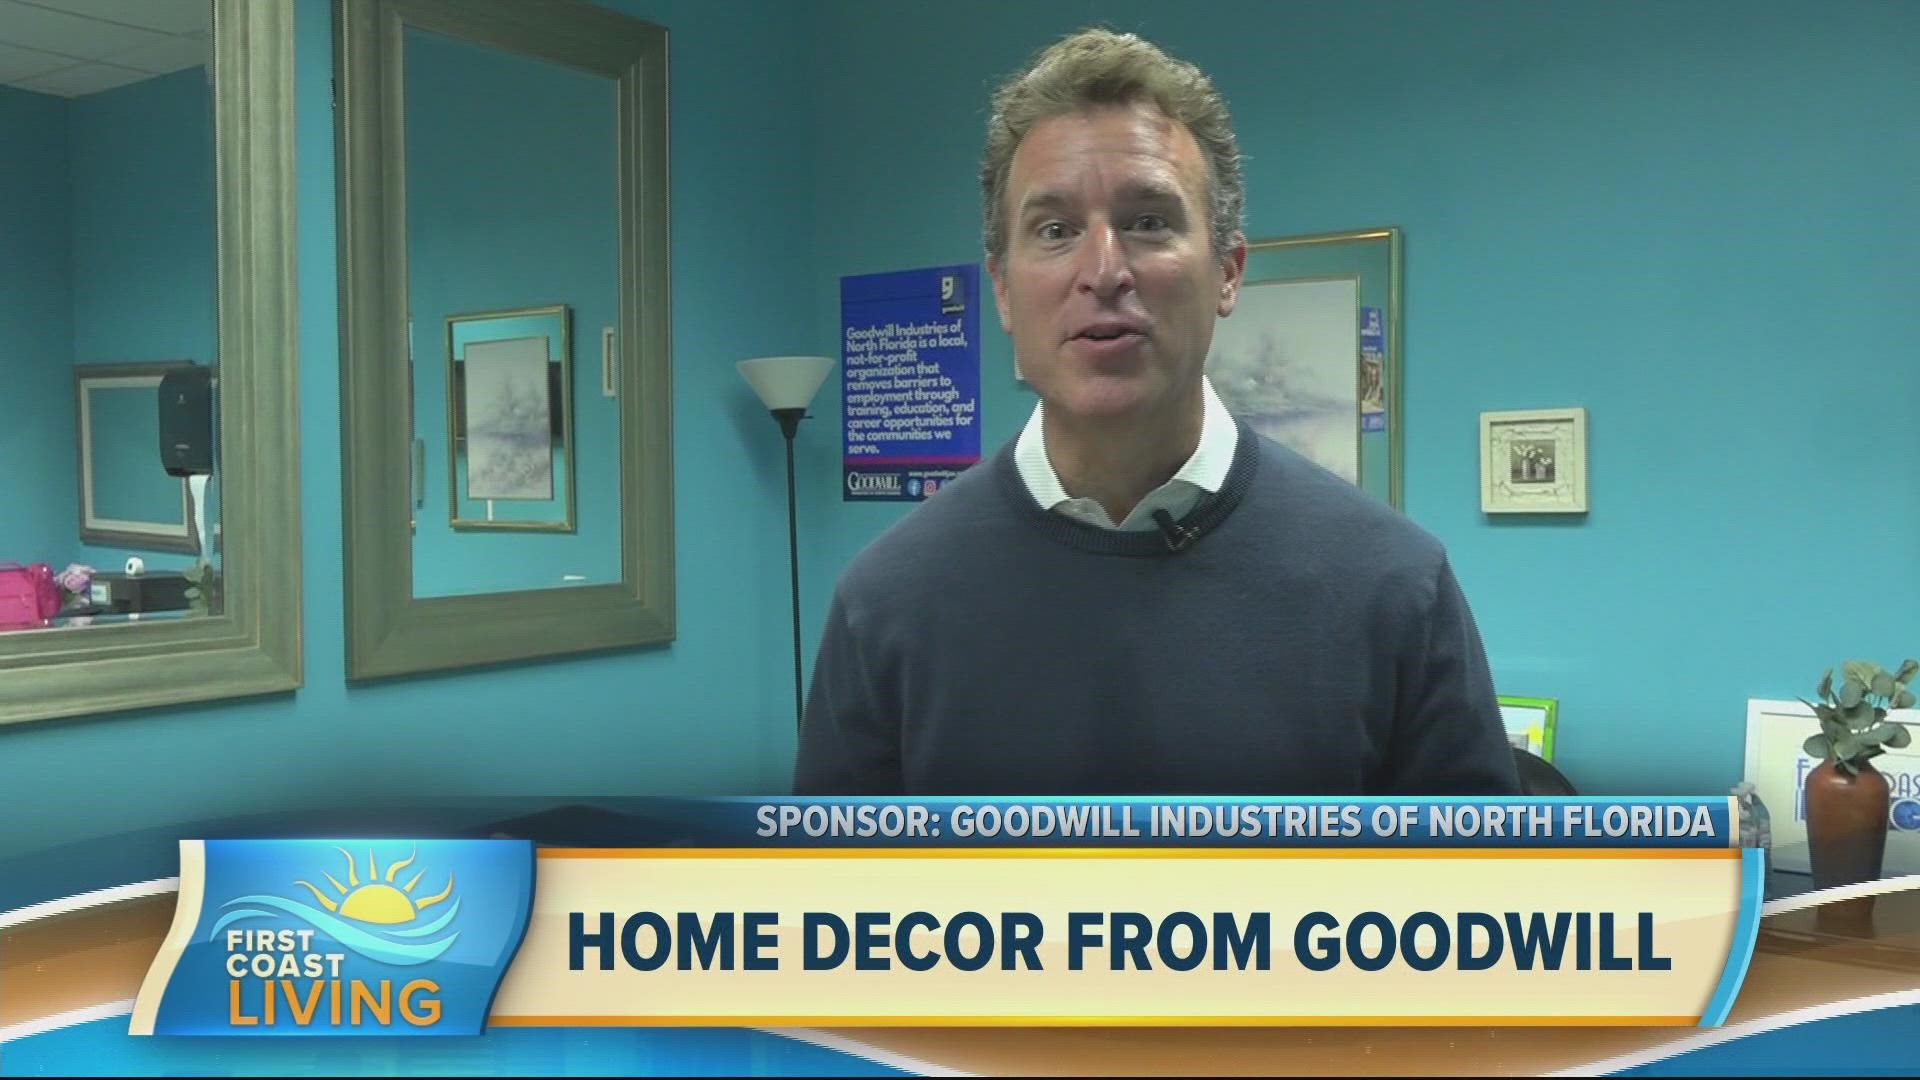 The First Coast Living greenroom is now sponsored by Goodwill! See how they decorated the space.